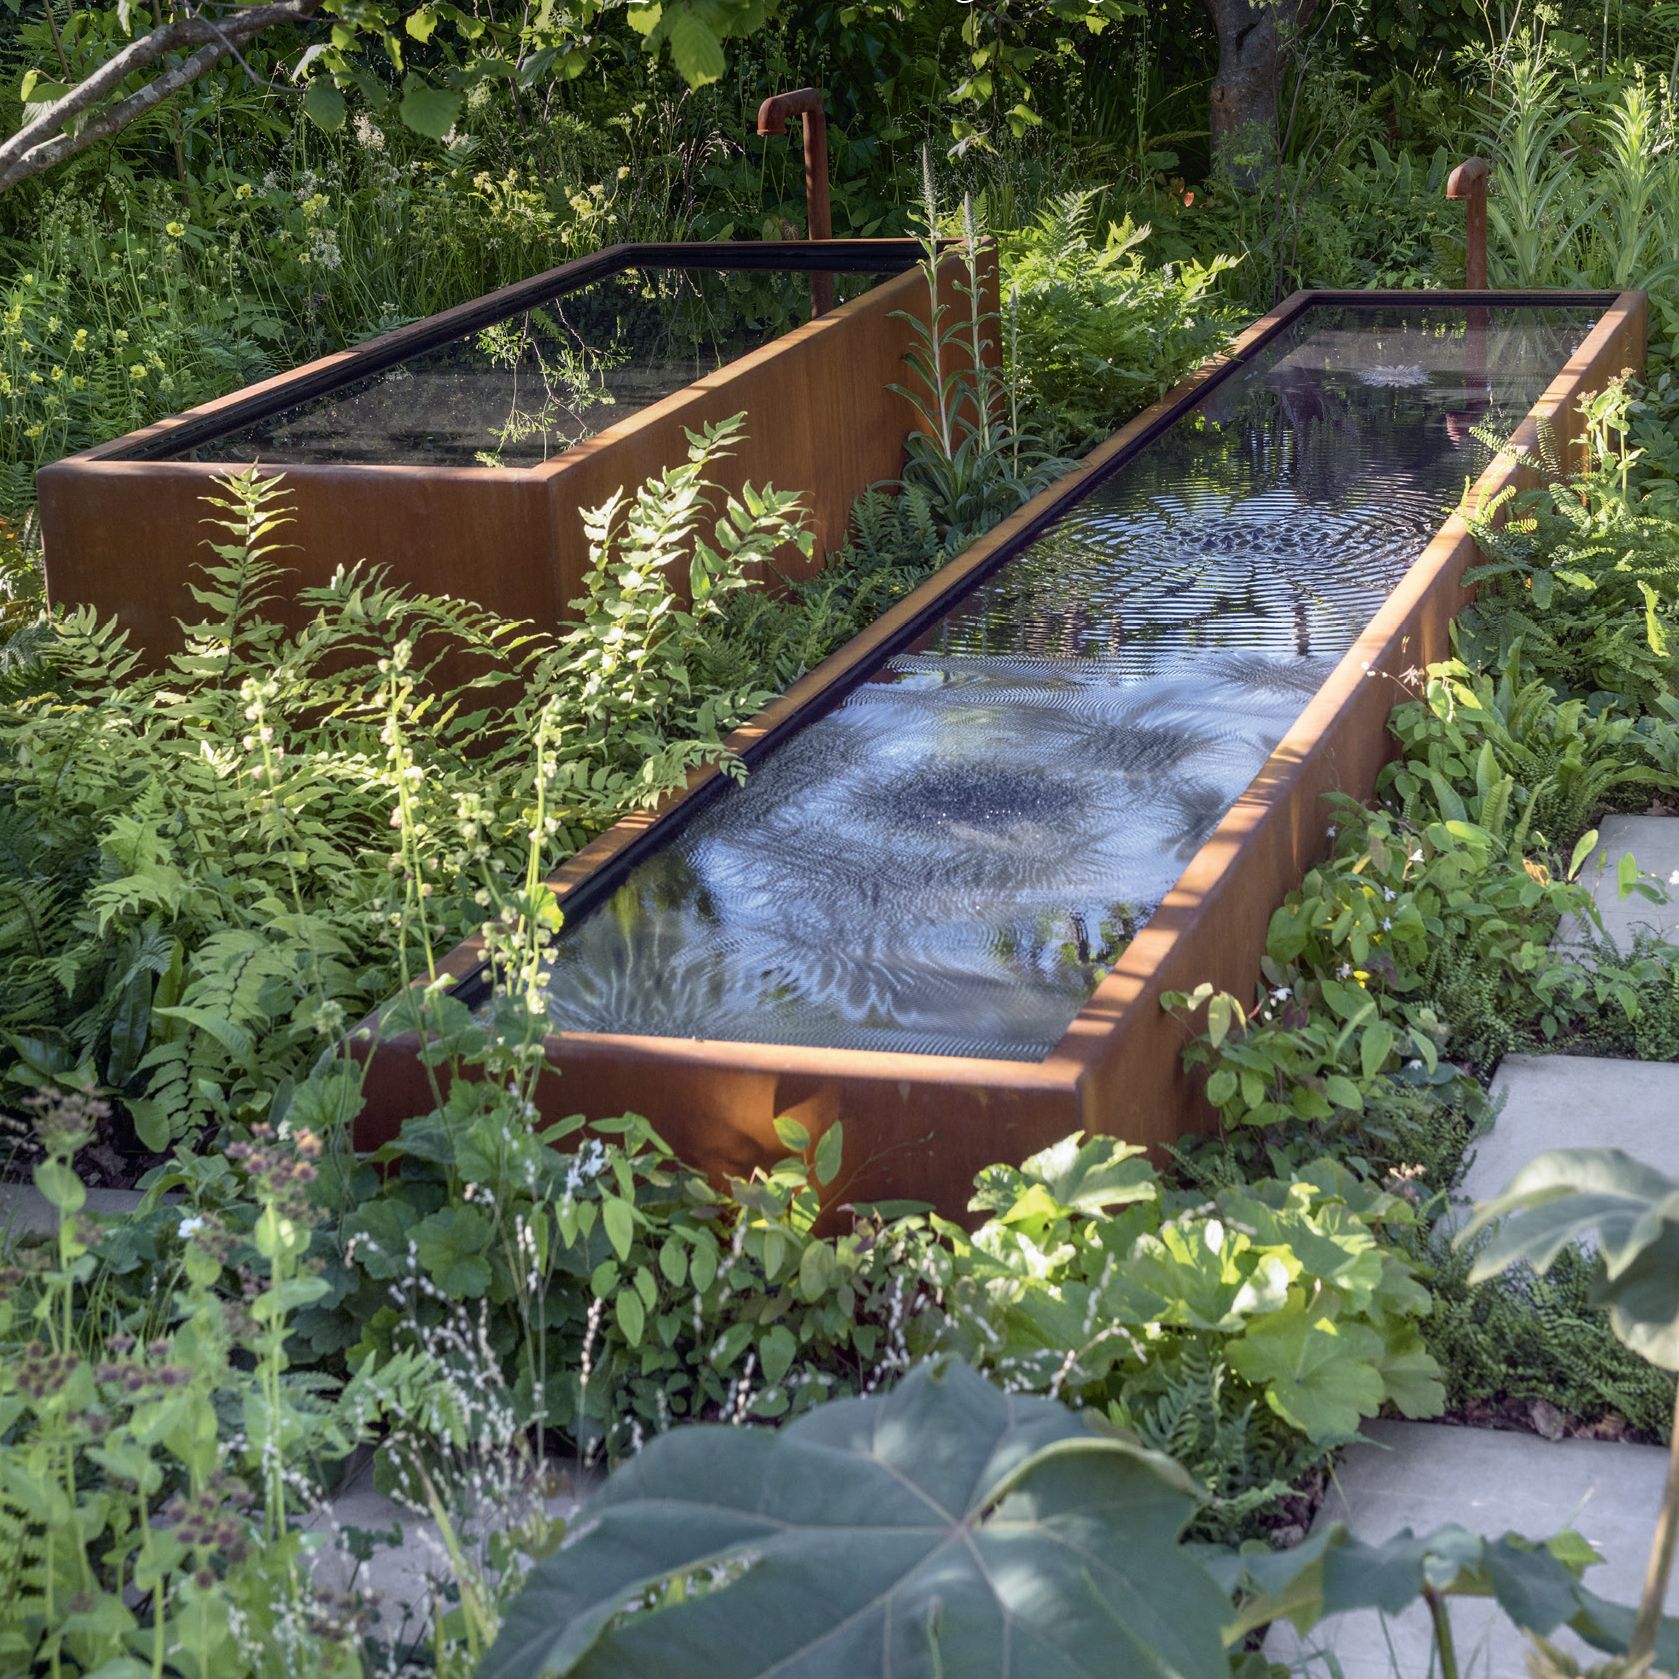 23 Outdoor Water Fountain Design Ideas We're Swooning Over